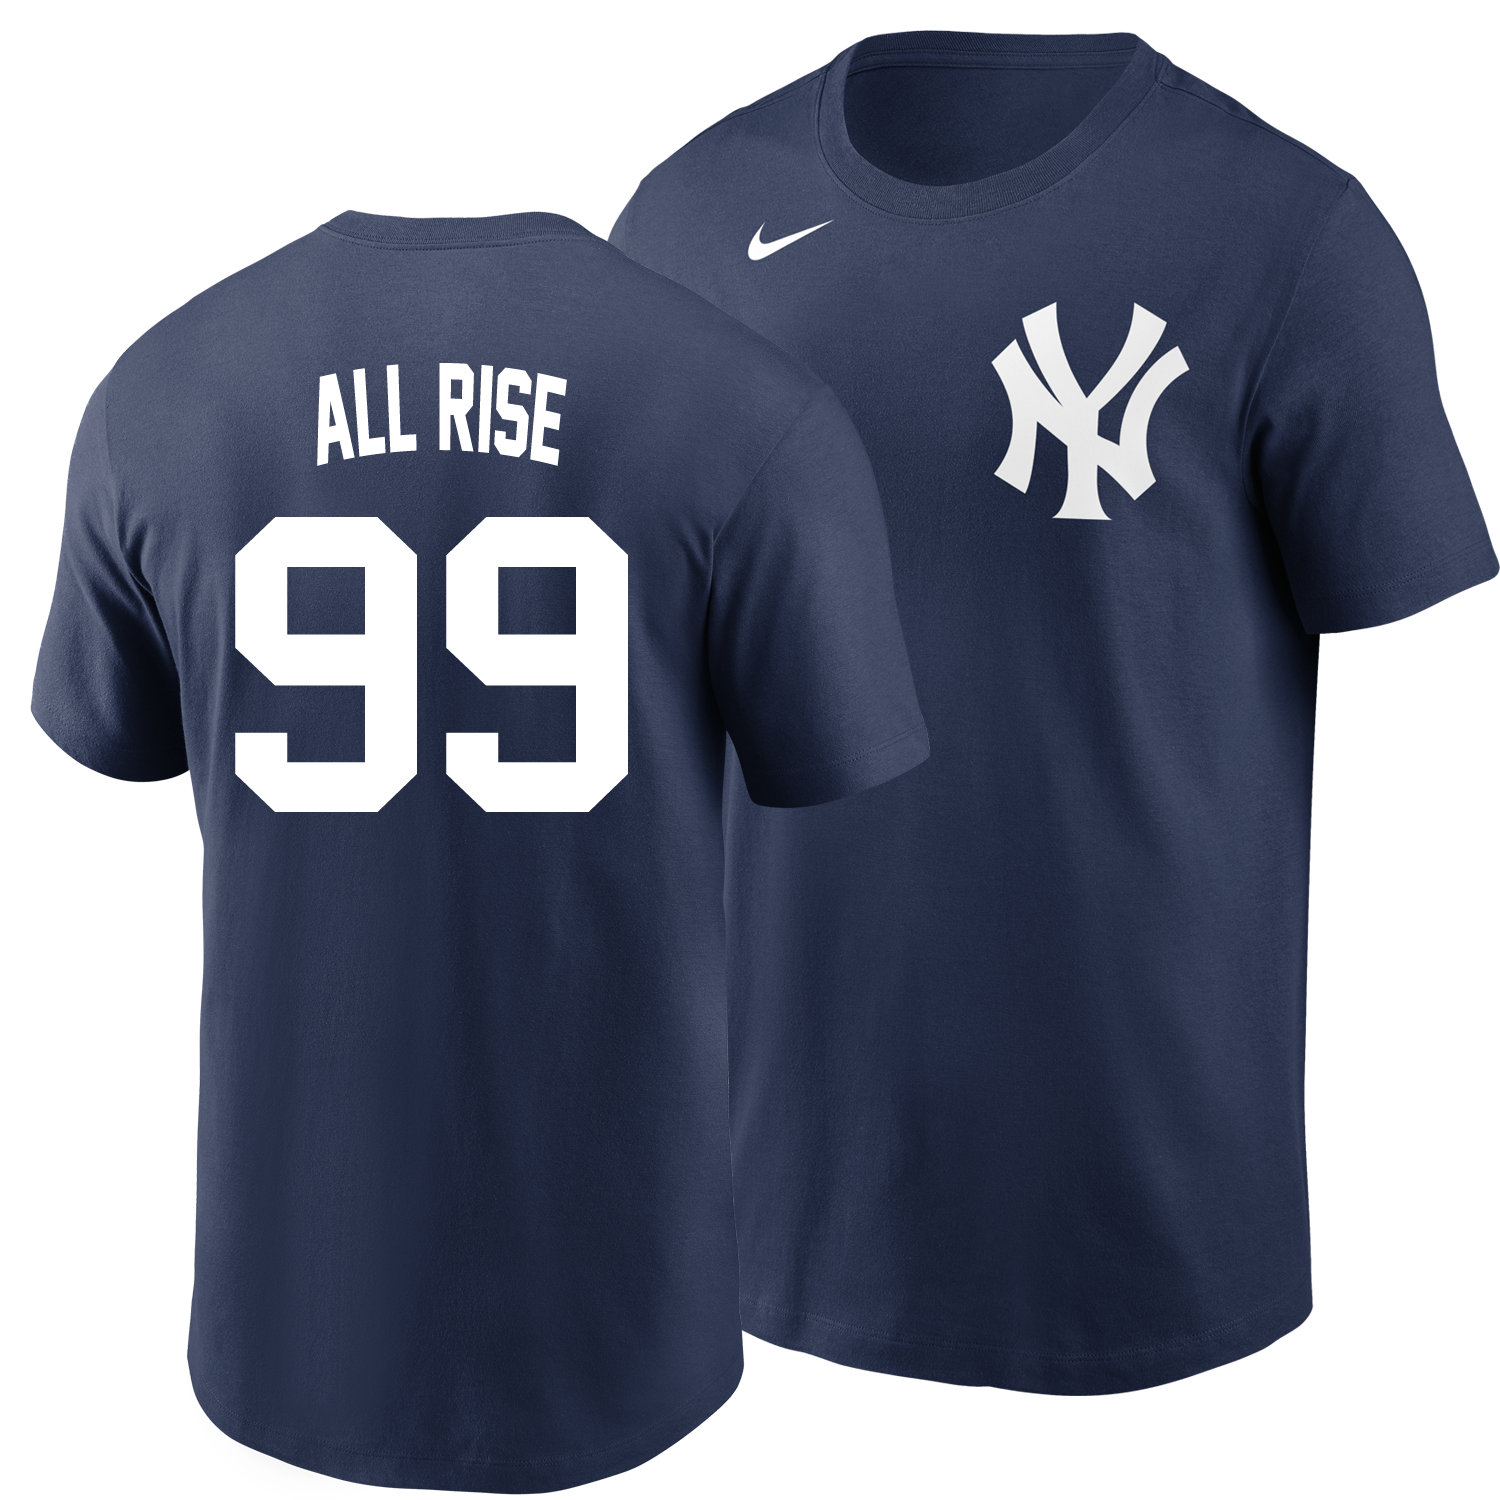 Majestic Aaron Judge New York Yankees All Rise Graphic Blue Small T-Shirt